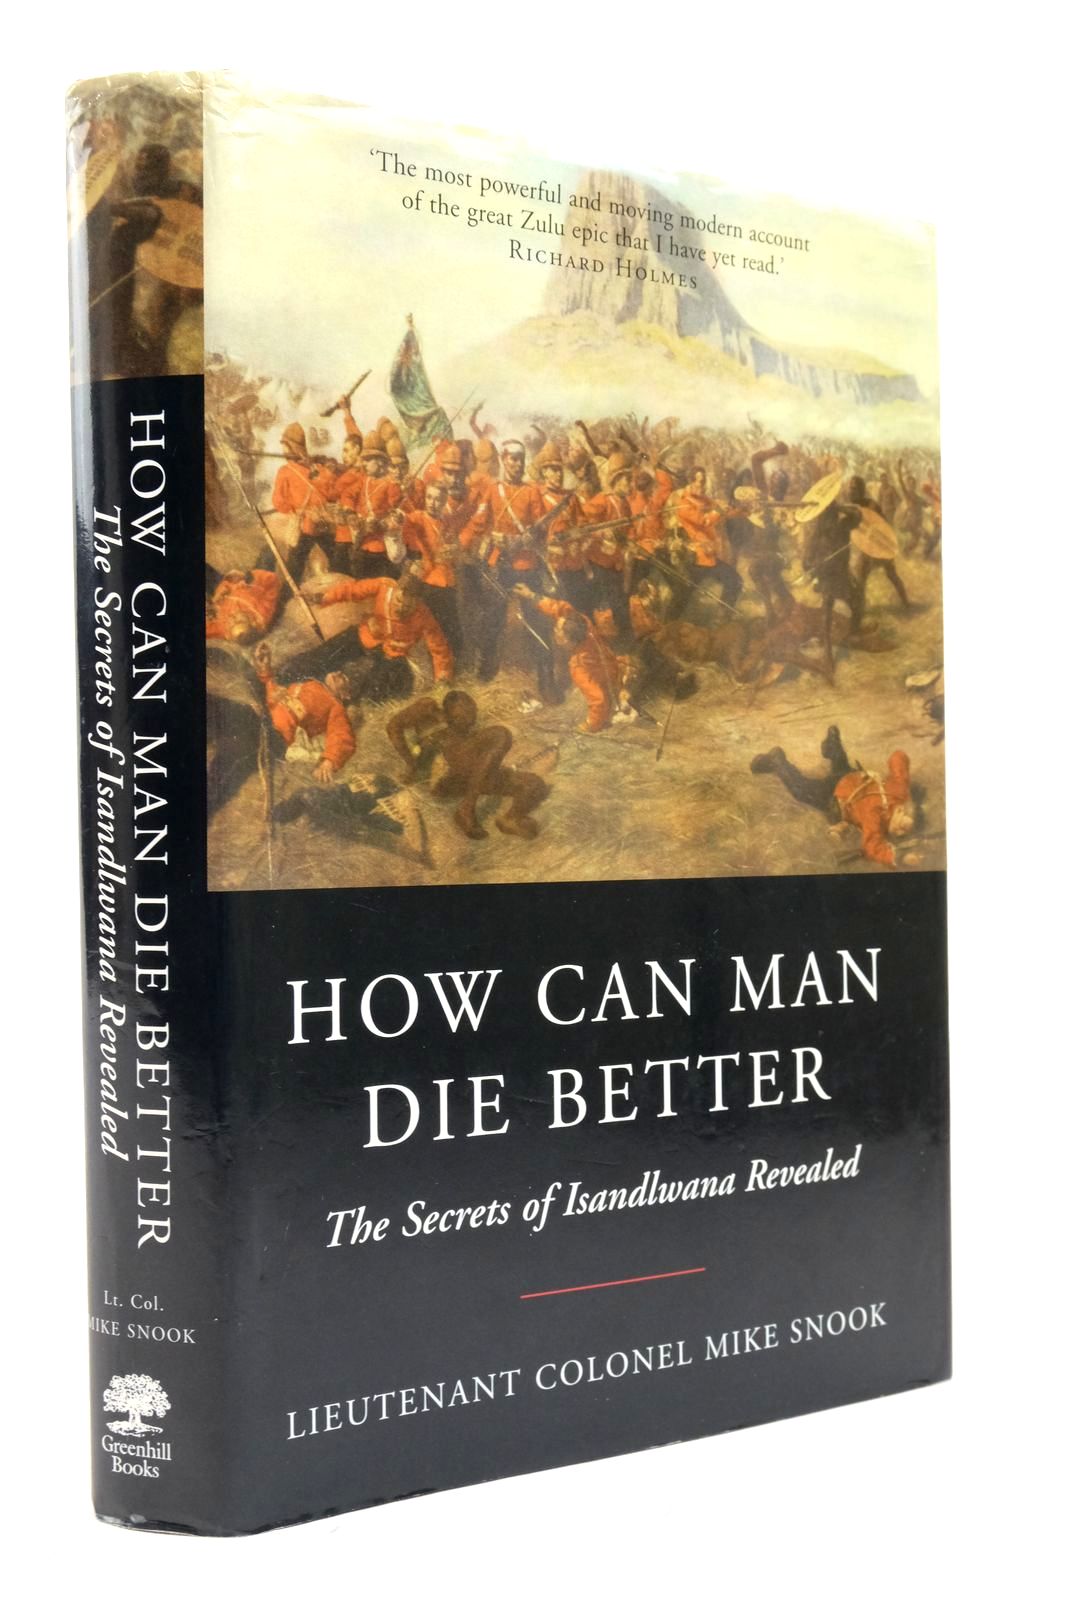 Photo of HOW CAN MAN DIE BETTER: THE SECRETS OF ISANDLWANA REVEALED written by Snook, Mike published by Greenhill Books, Stackpole Books (STOCK CODE: 2138335)  for sale by Stella & Rose's Books